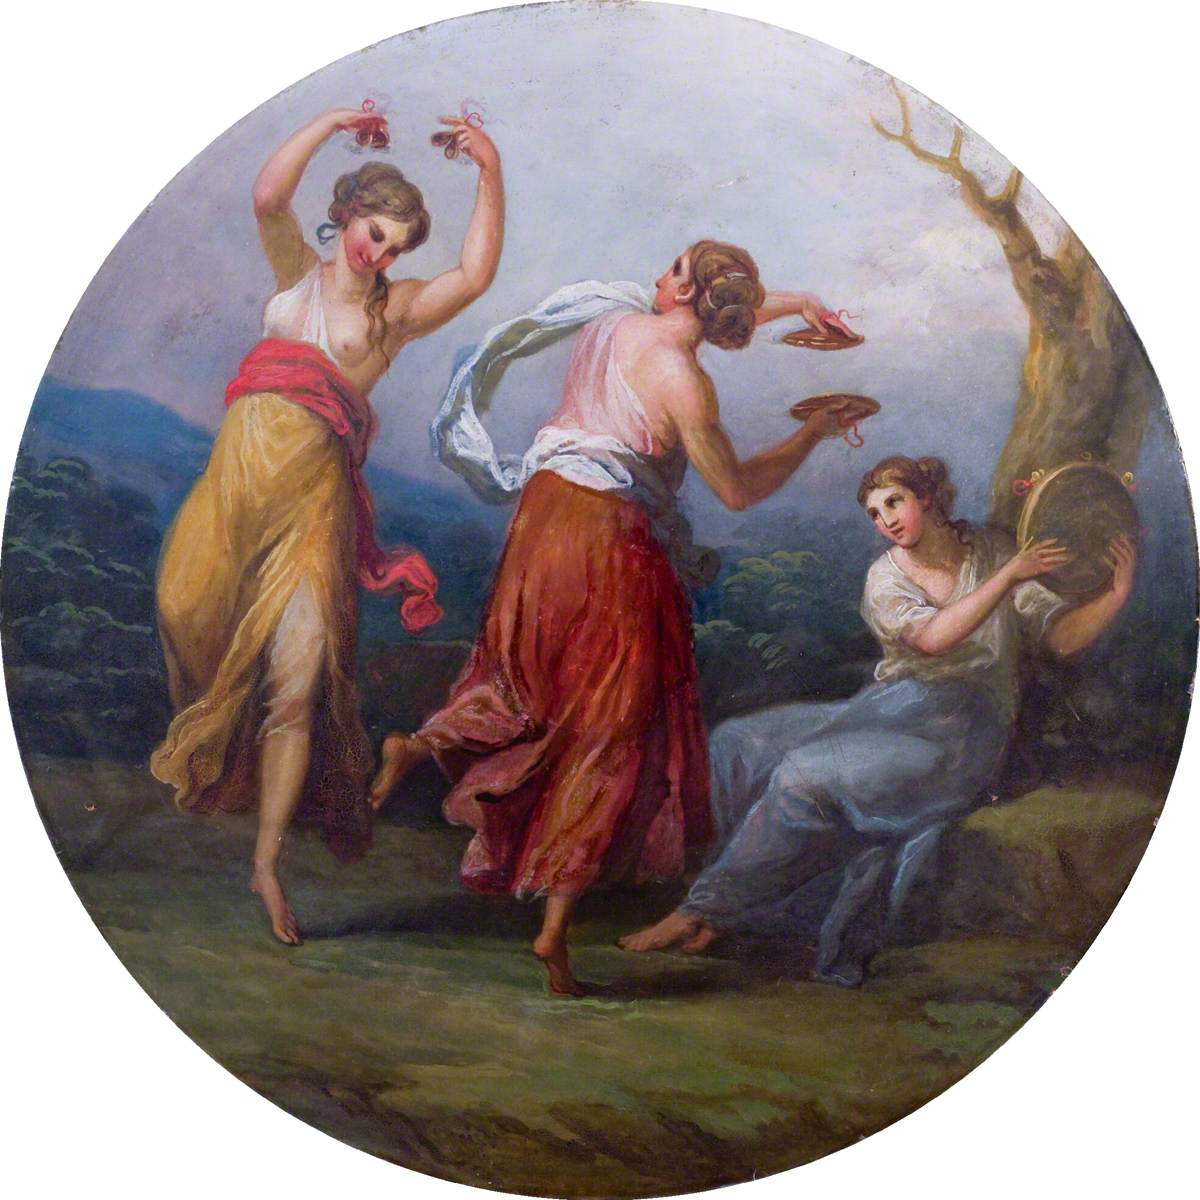 Three Dancing Figures with Cymbals and Drums